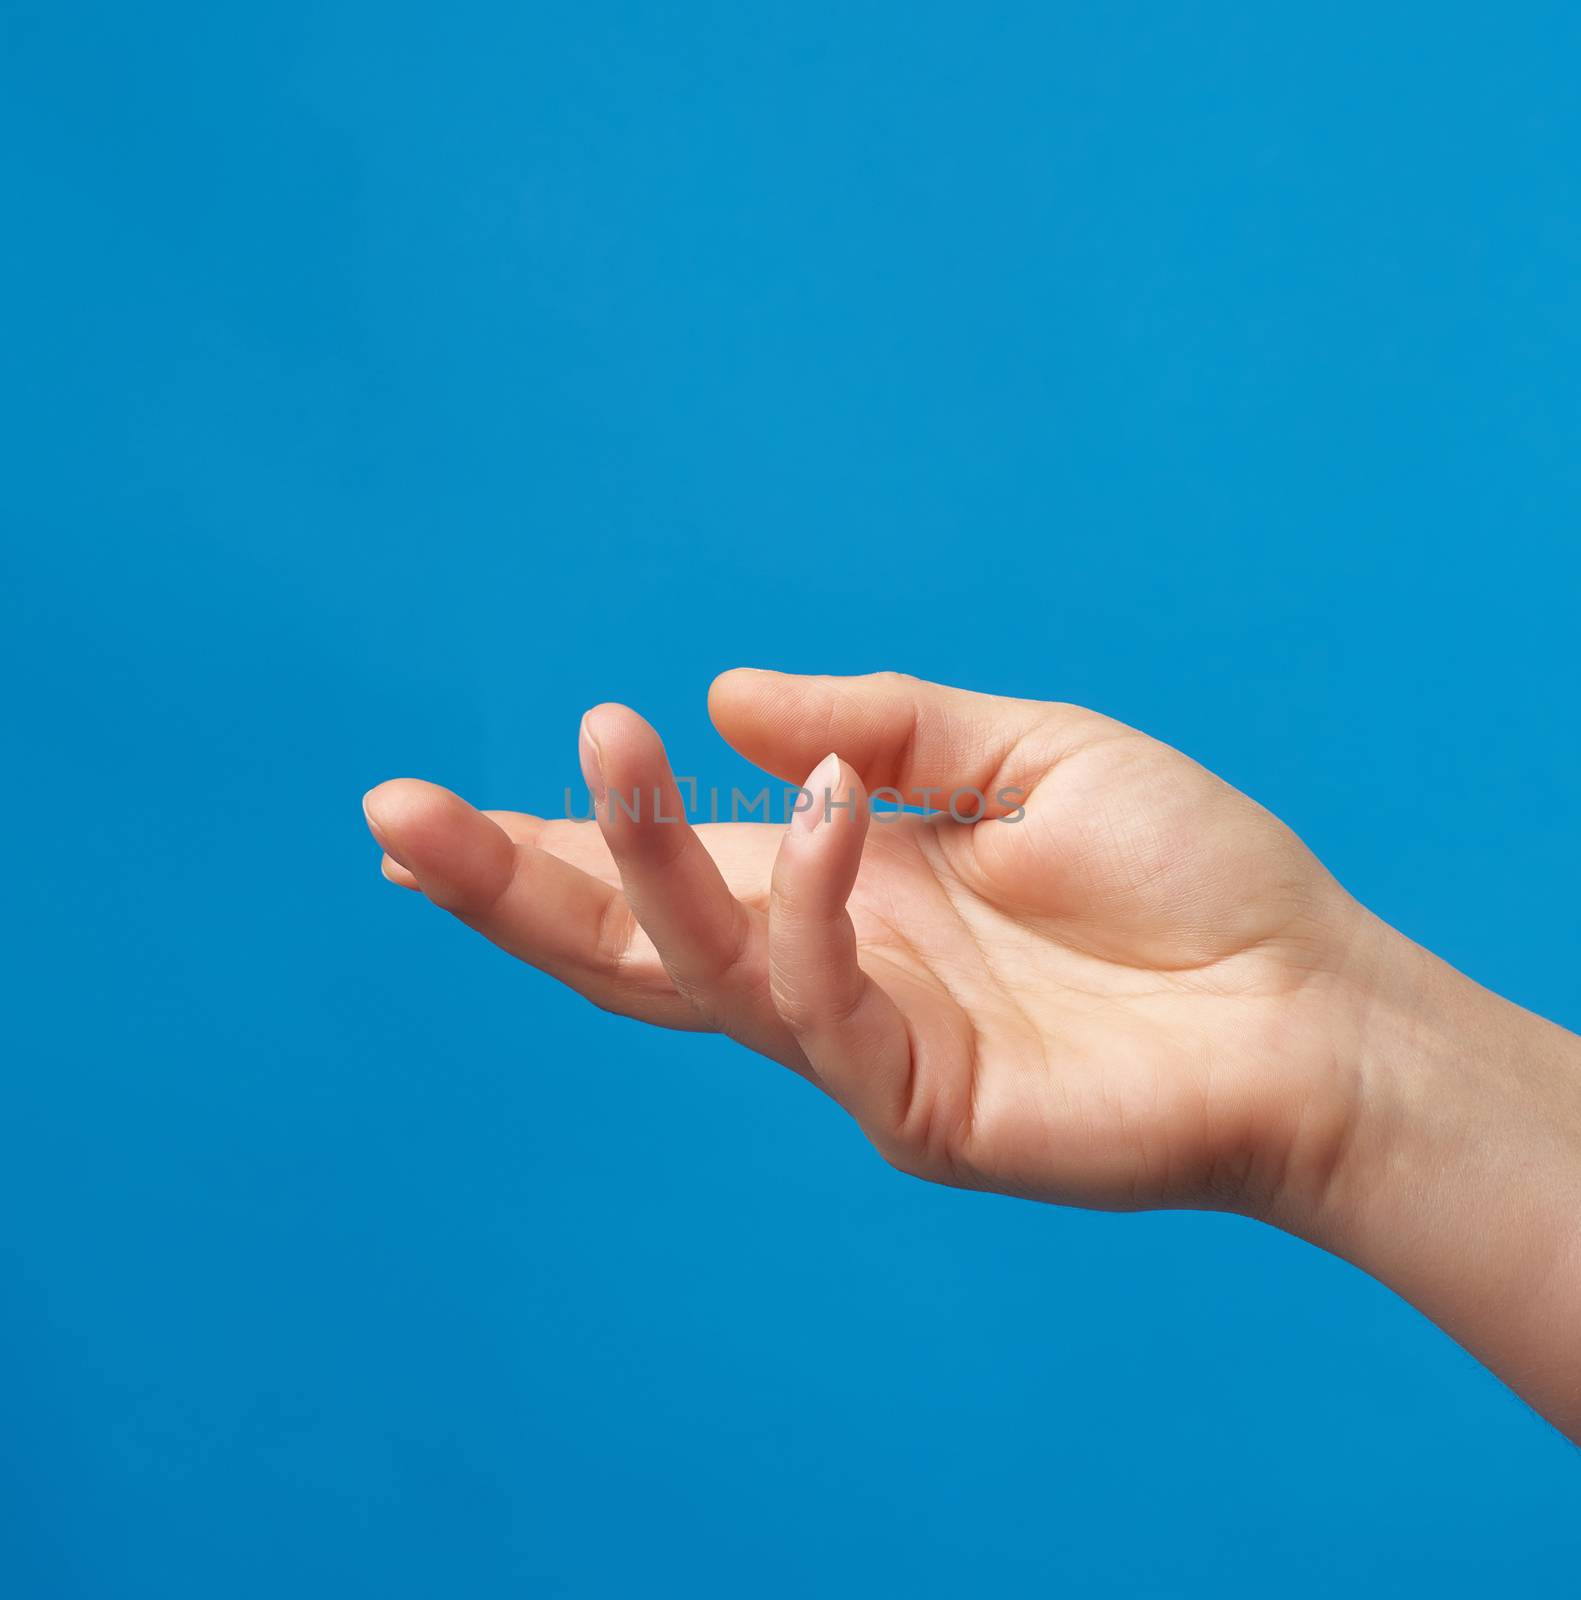 female hand with an open palm on a blue background, imitation of holding an item, a request for help